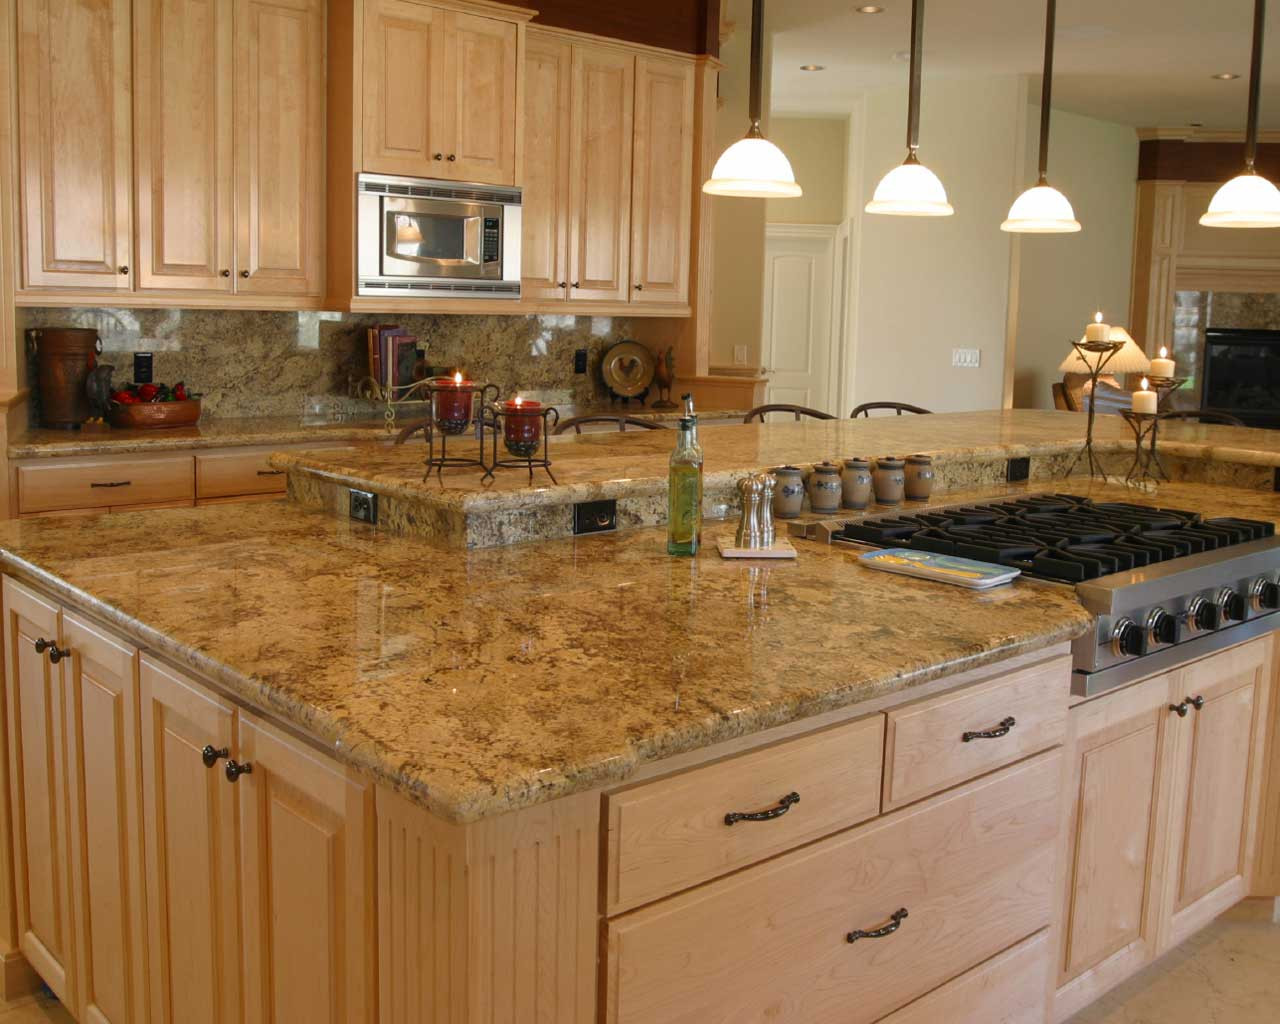 Kitchen Cabinet With Counter
 Granite Counter Tops for Beautiful Kitchen Island in